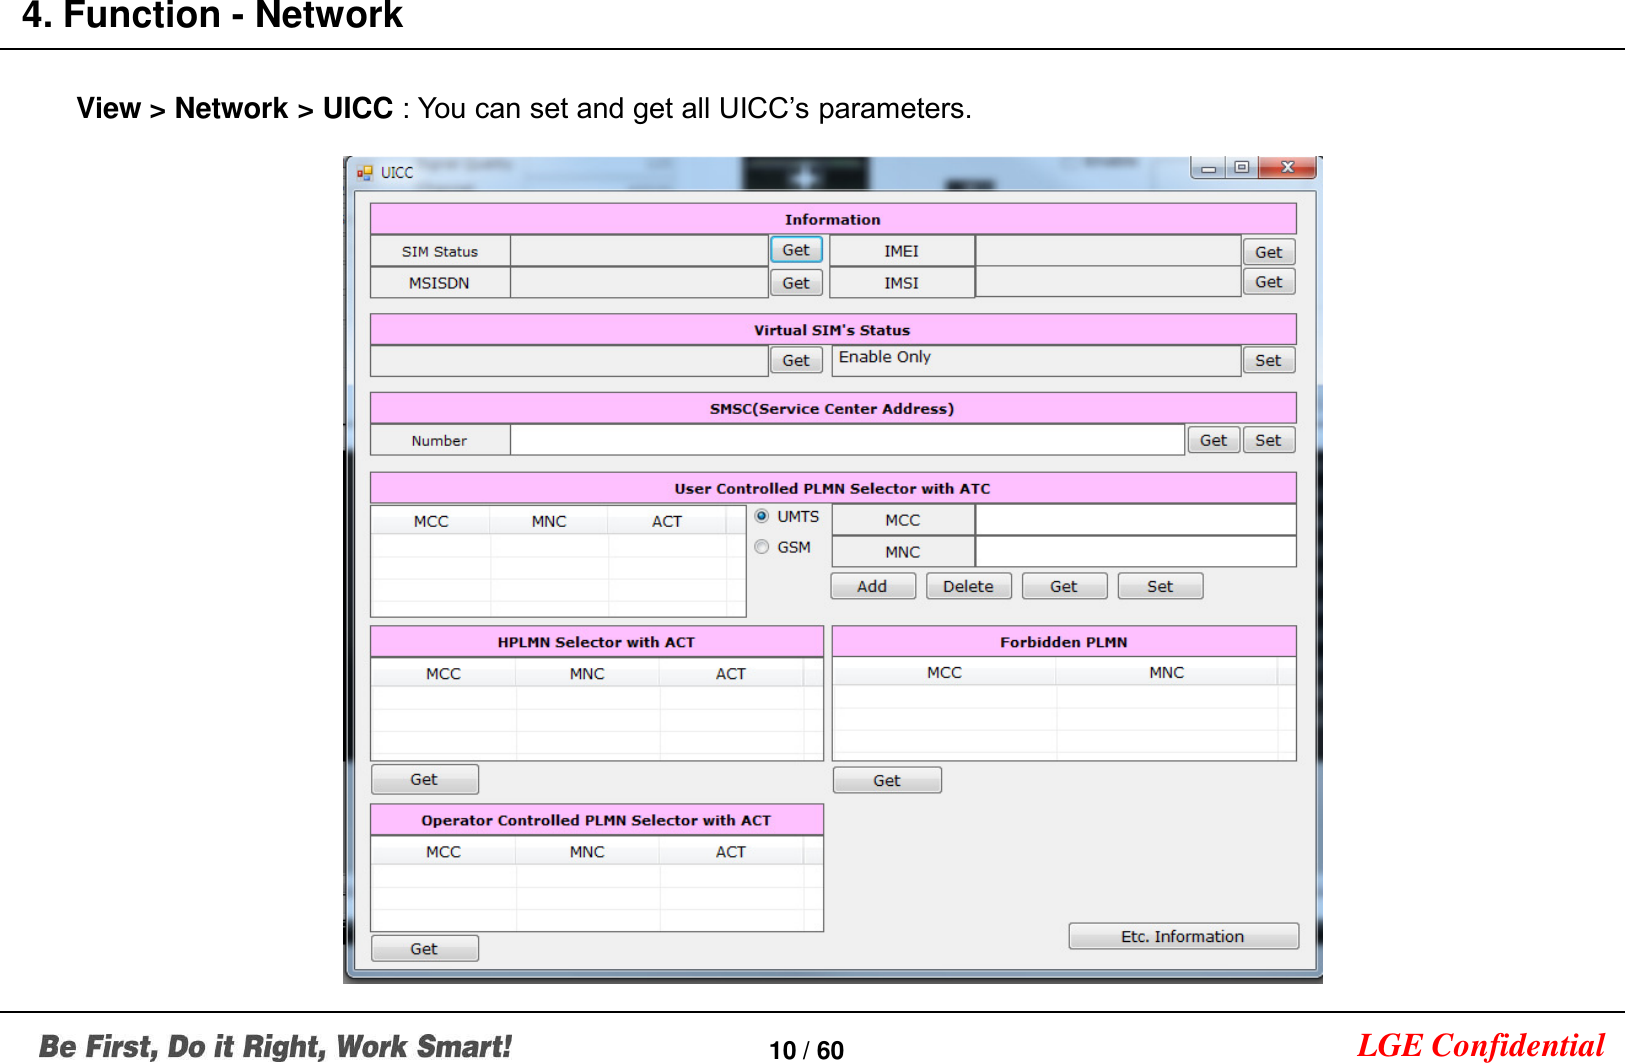 LGE Confidential4. Function - Network10 / 60View &gt; Network &gt; UICC : You can set and get all UICC’s parameters.